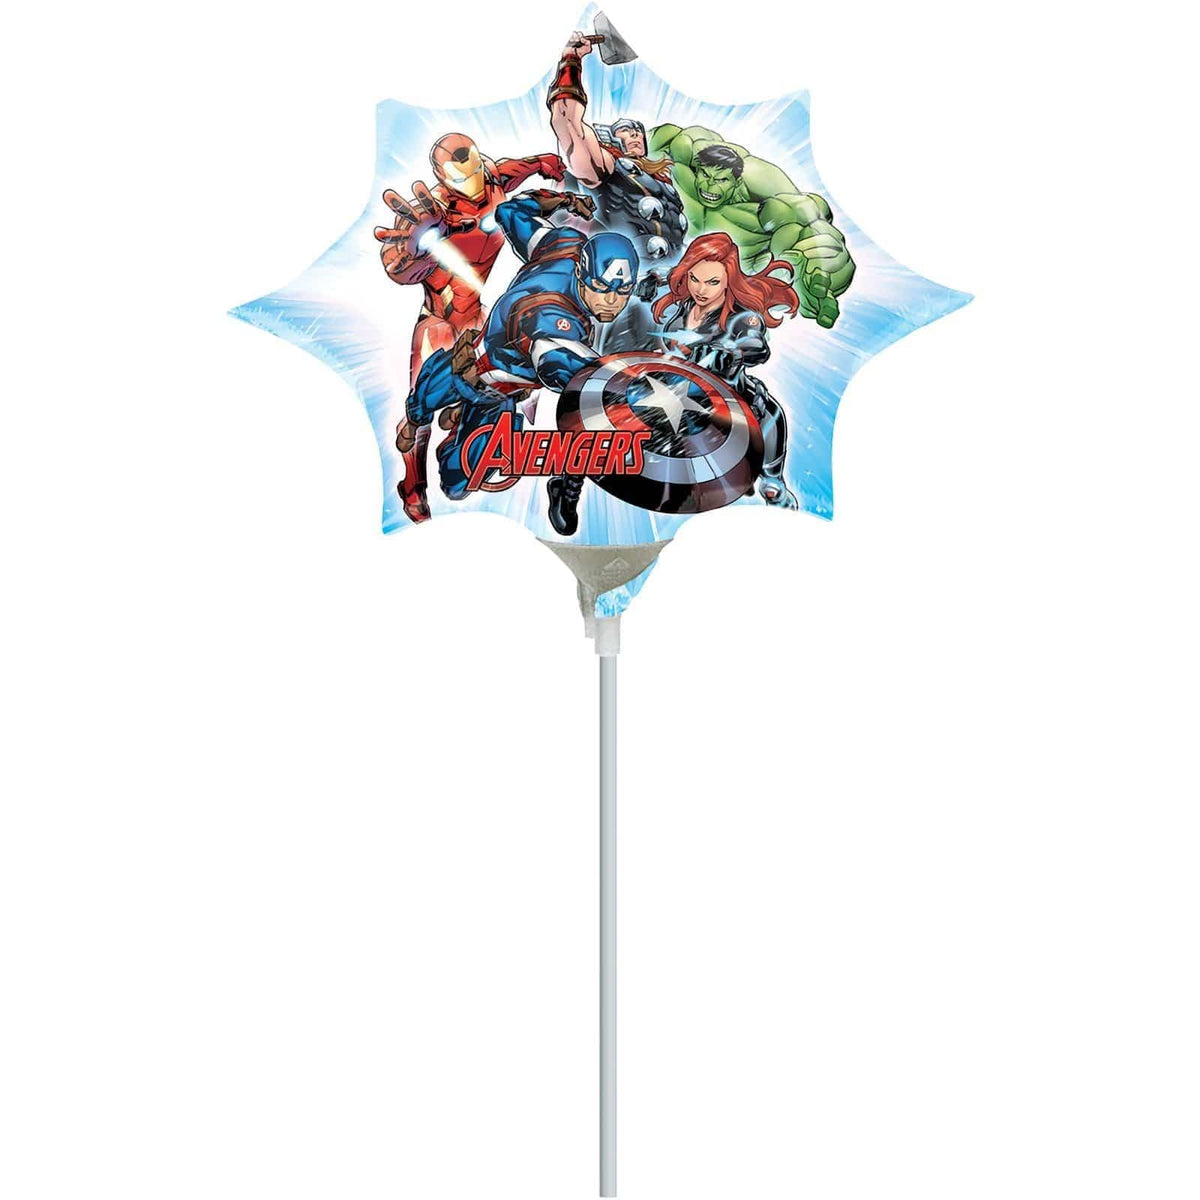 Buy Balloons Avengers Air Filled Foil Balloon sold at Party Expert